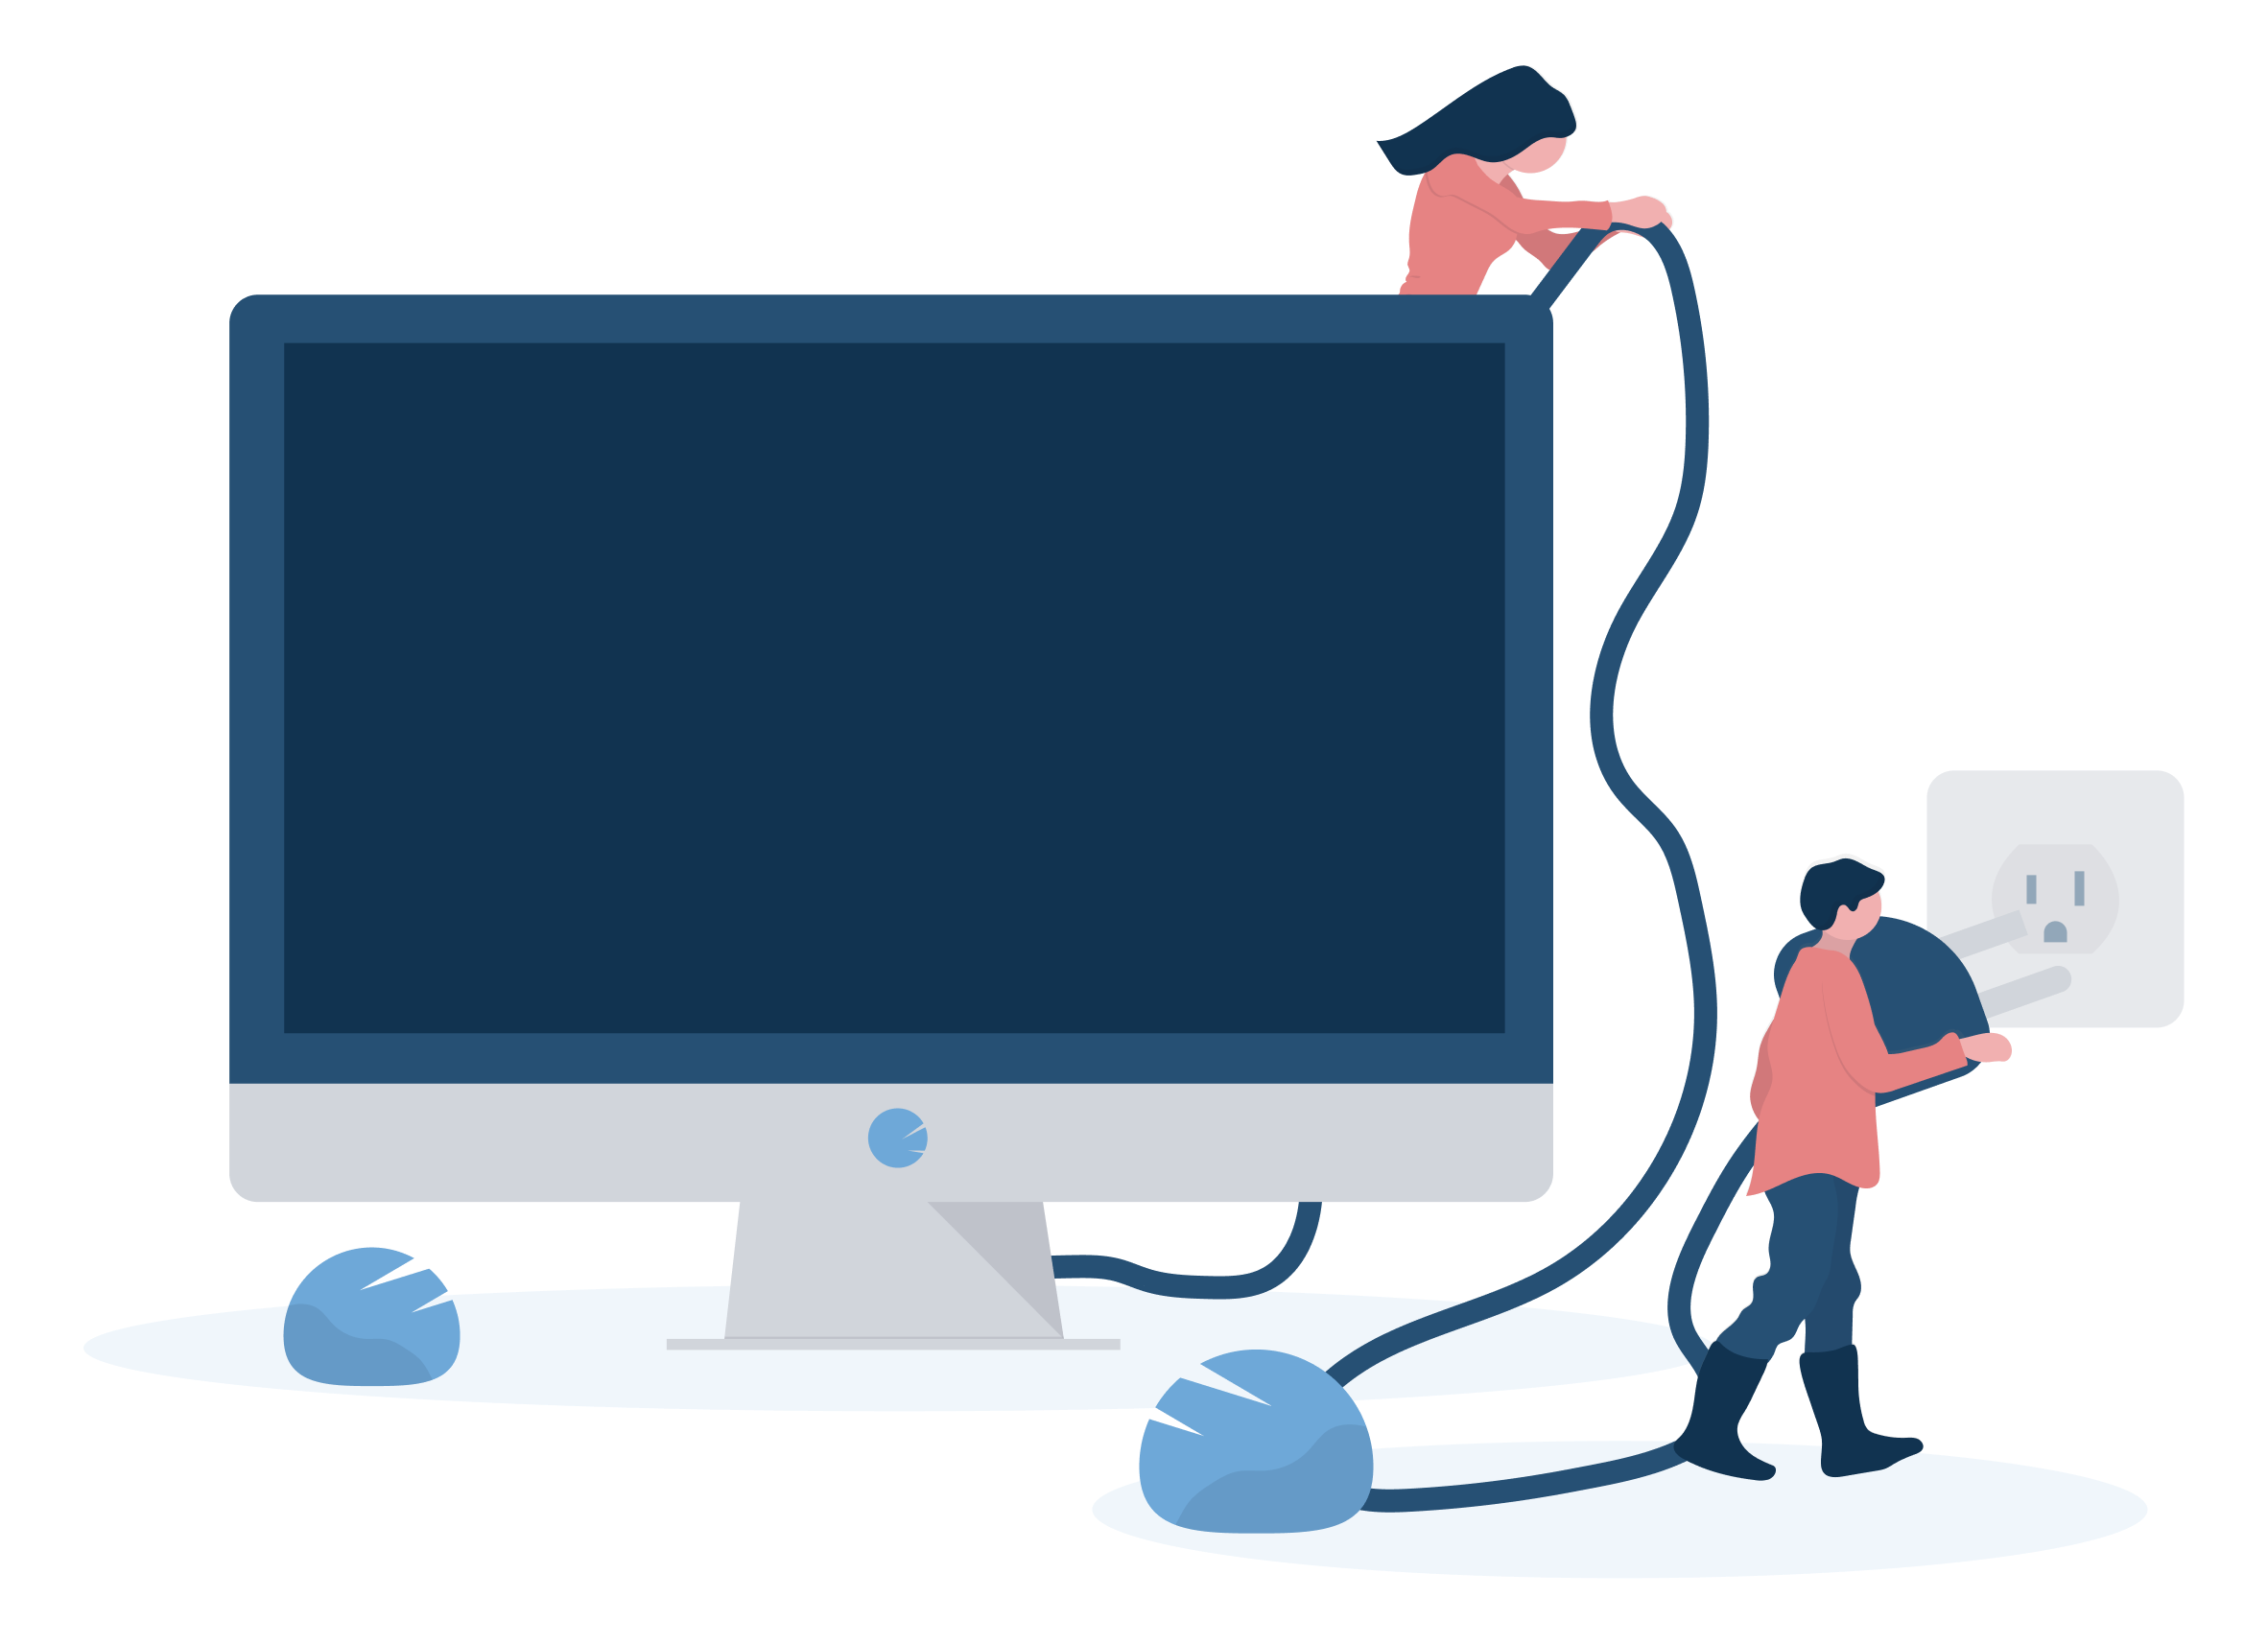 Illustration of small people plugging in a large computer monitor